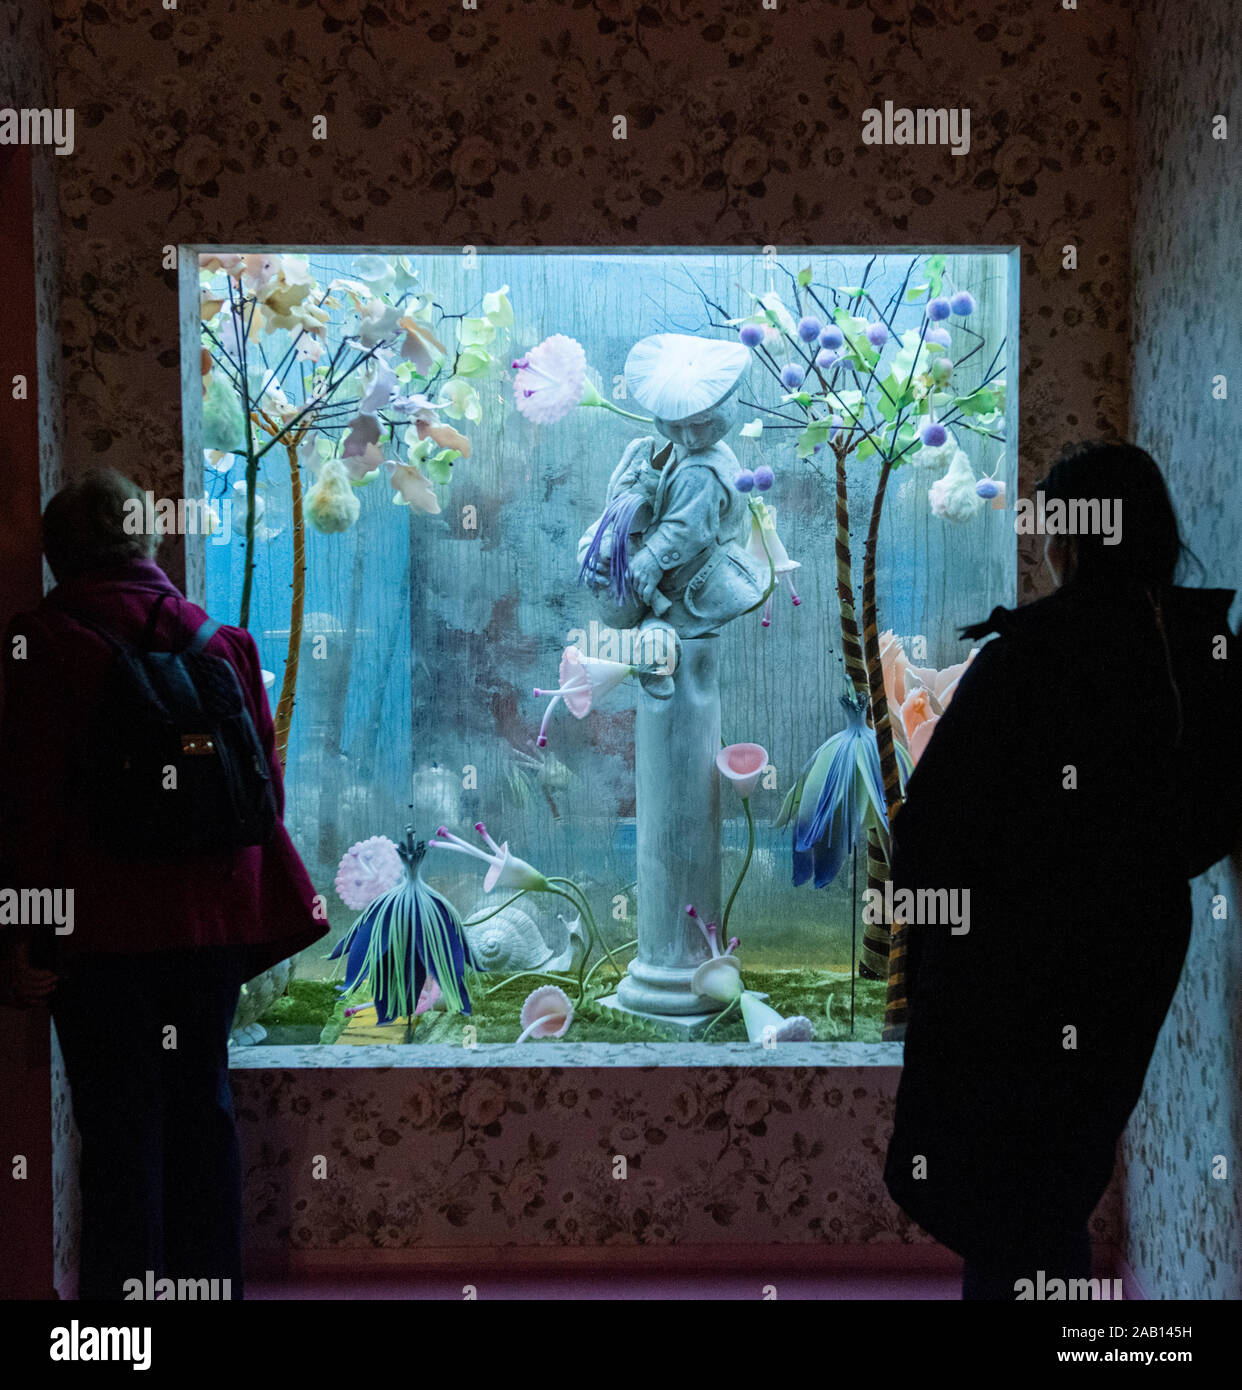 Visitors looking at exhibit in the Tim Walker 'Wonderful Things' exhibition at the V&A Museum, Nov 2019. South Kensington, London, England, UK. Stock Photo